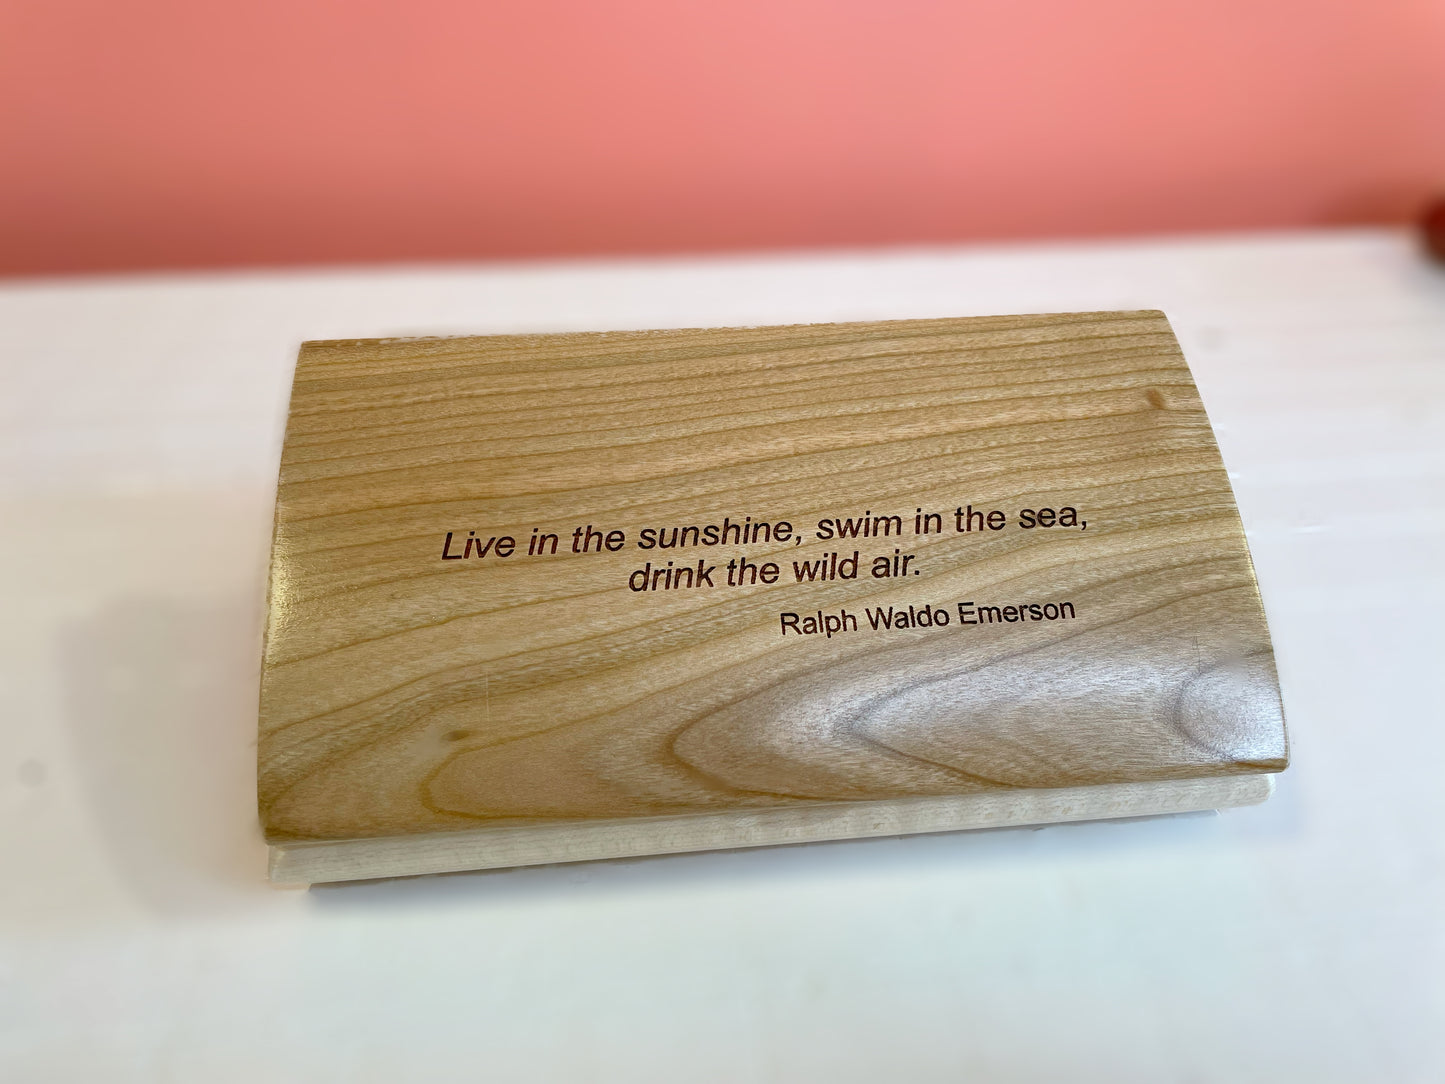 Mikutowski Woodworking Inspirational Box - Live In The Sunshine available at The Good Life Boutique